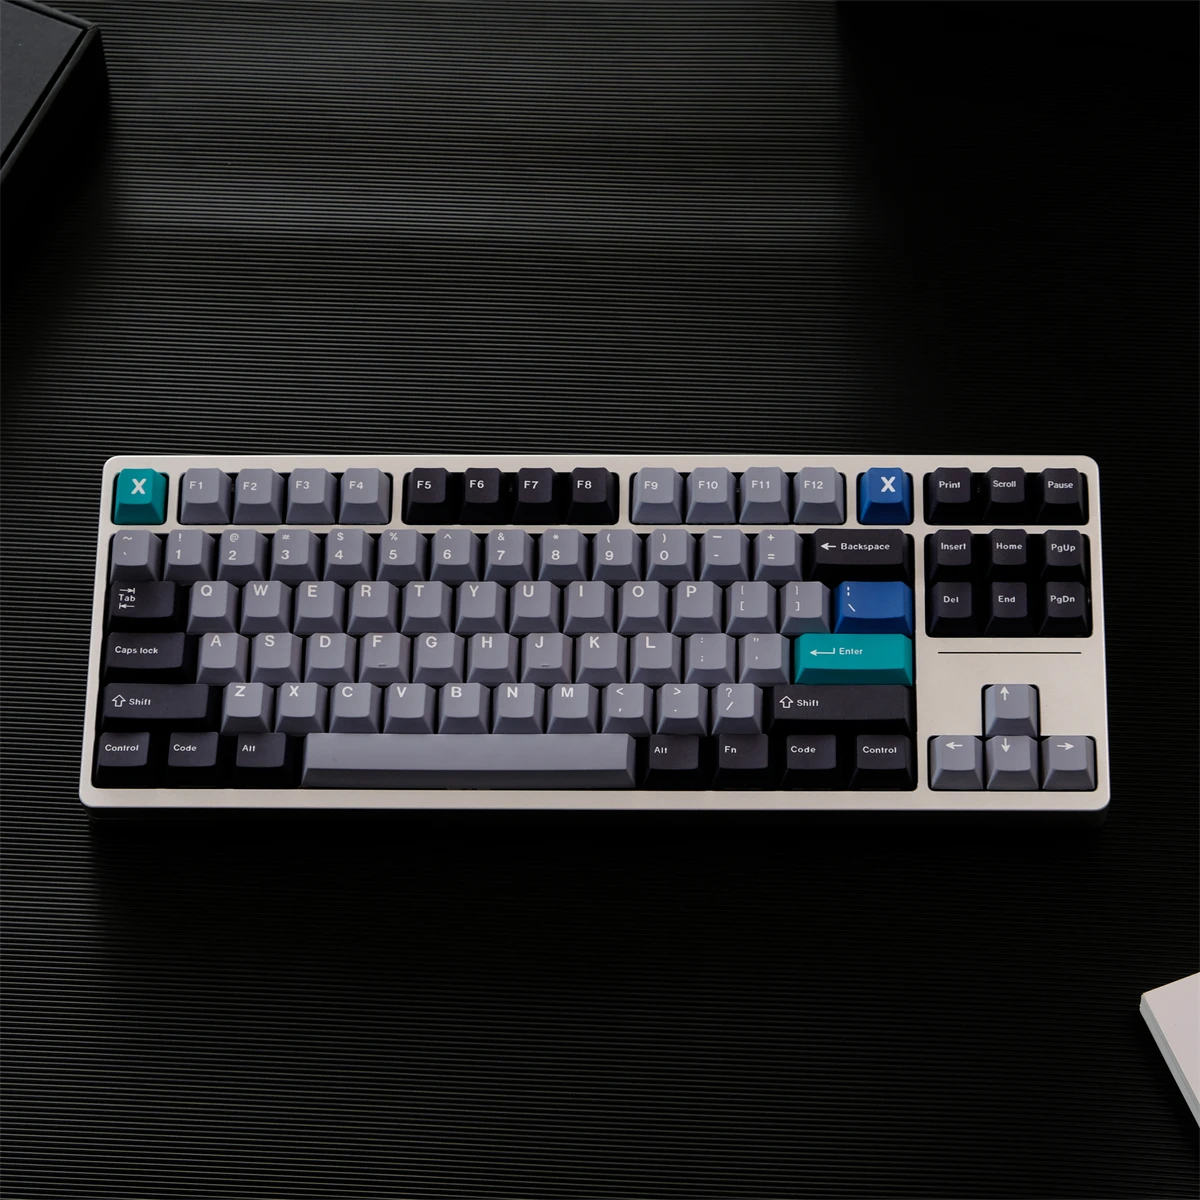 

129 Keys GMK Record Keycaps Five-sided Sublimation PBT Cherry Profile Keycap For MX switches Gaming Mechanical Keyboard Keycaps